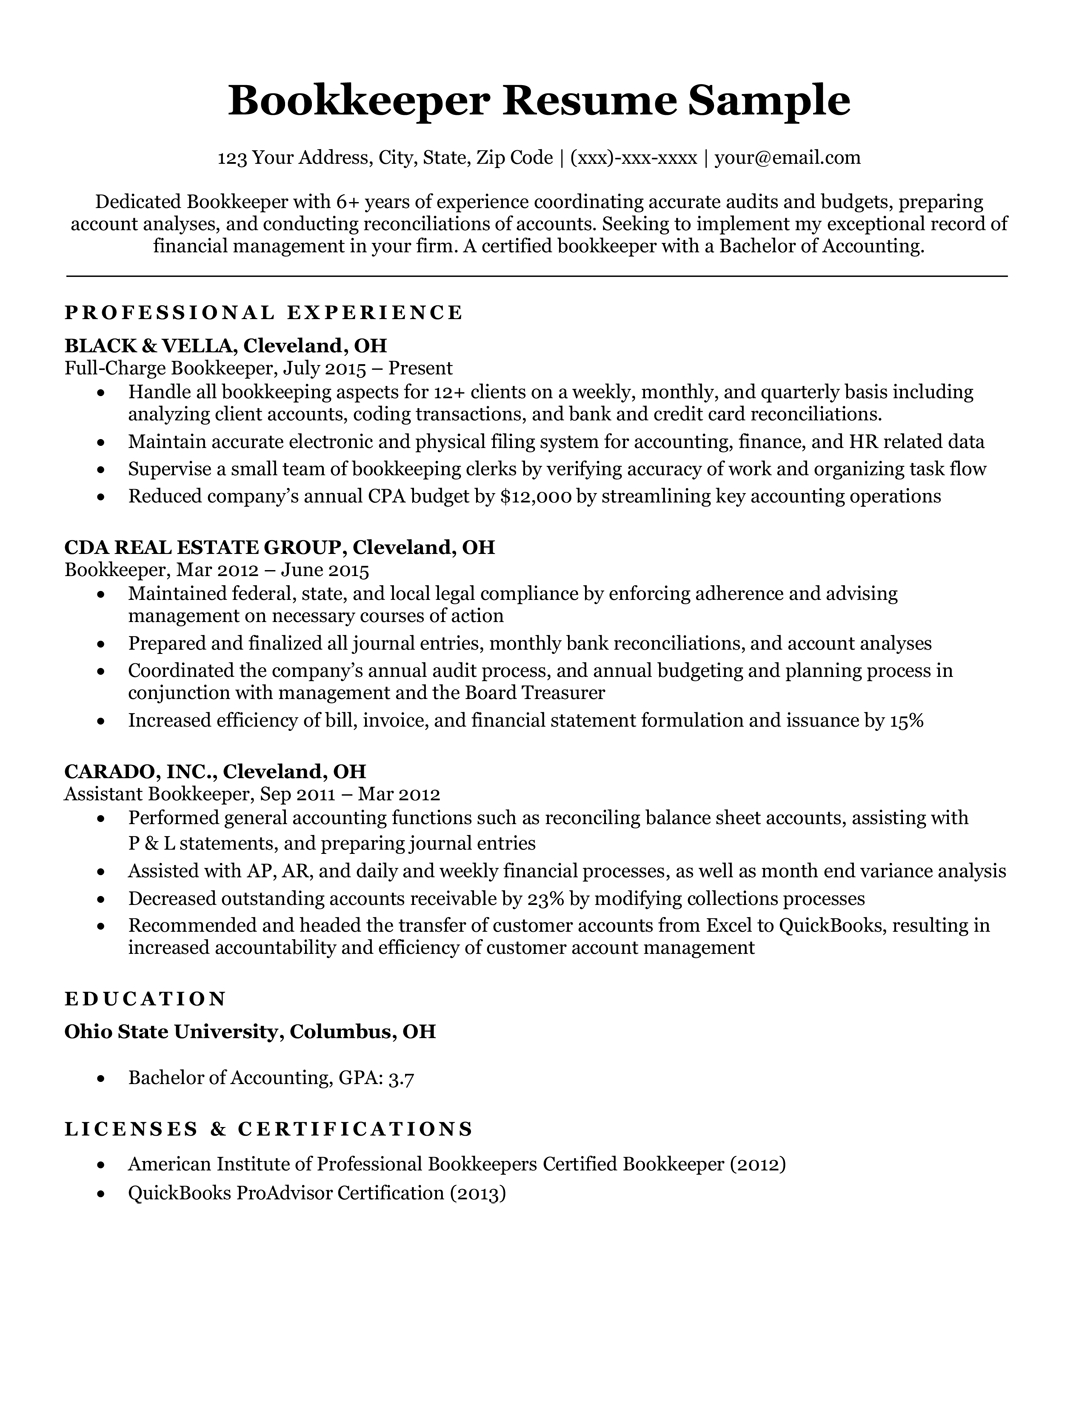 Bookkeeper Resume Sample Writing Tips Resume Companion in size 1085 X 1404